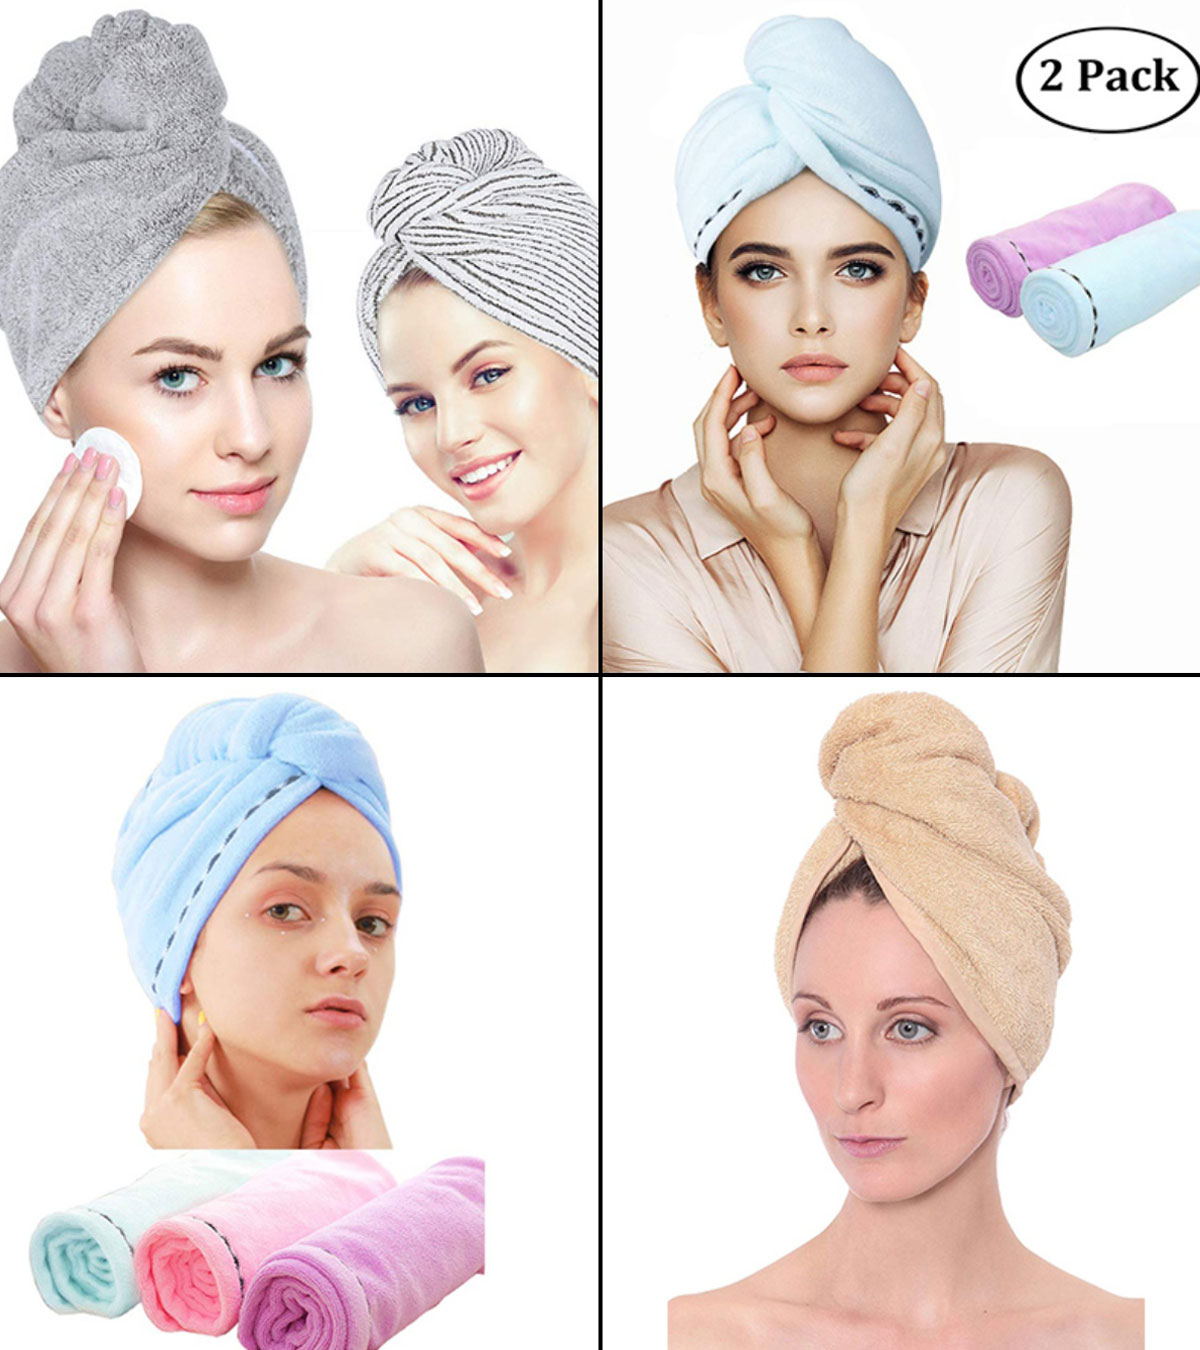 15 Best Hair Towels To Dry Hair And Reduce Frizz In 2023, Expert-Approved